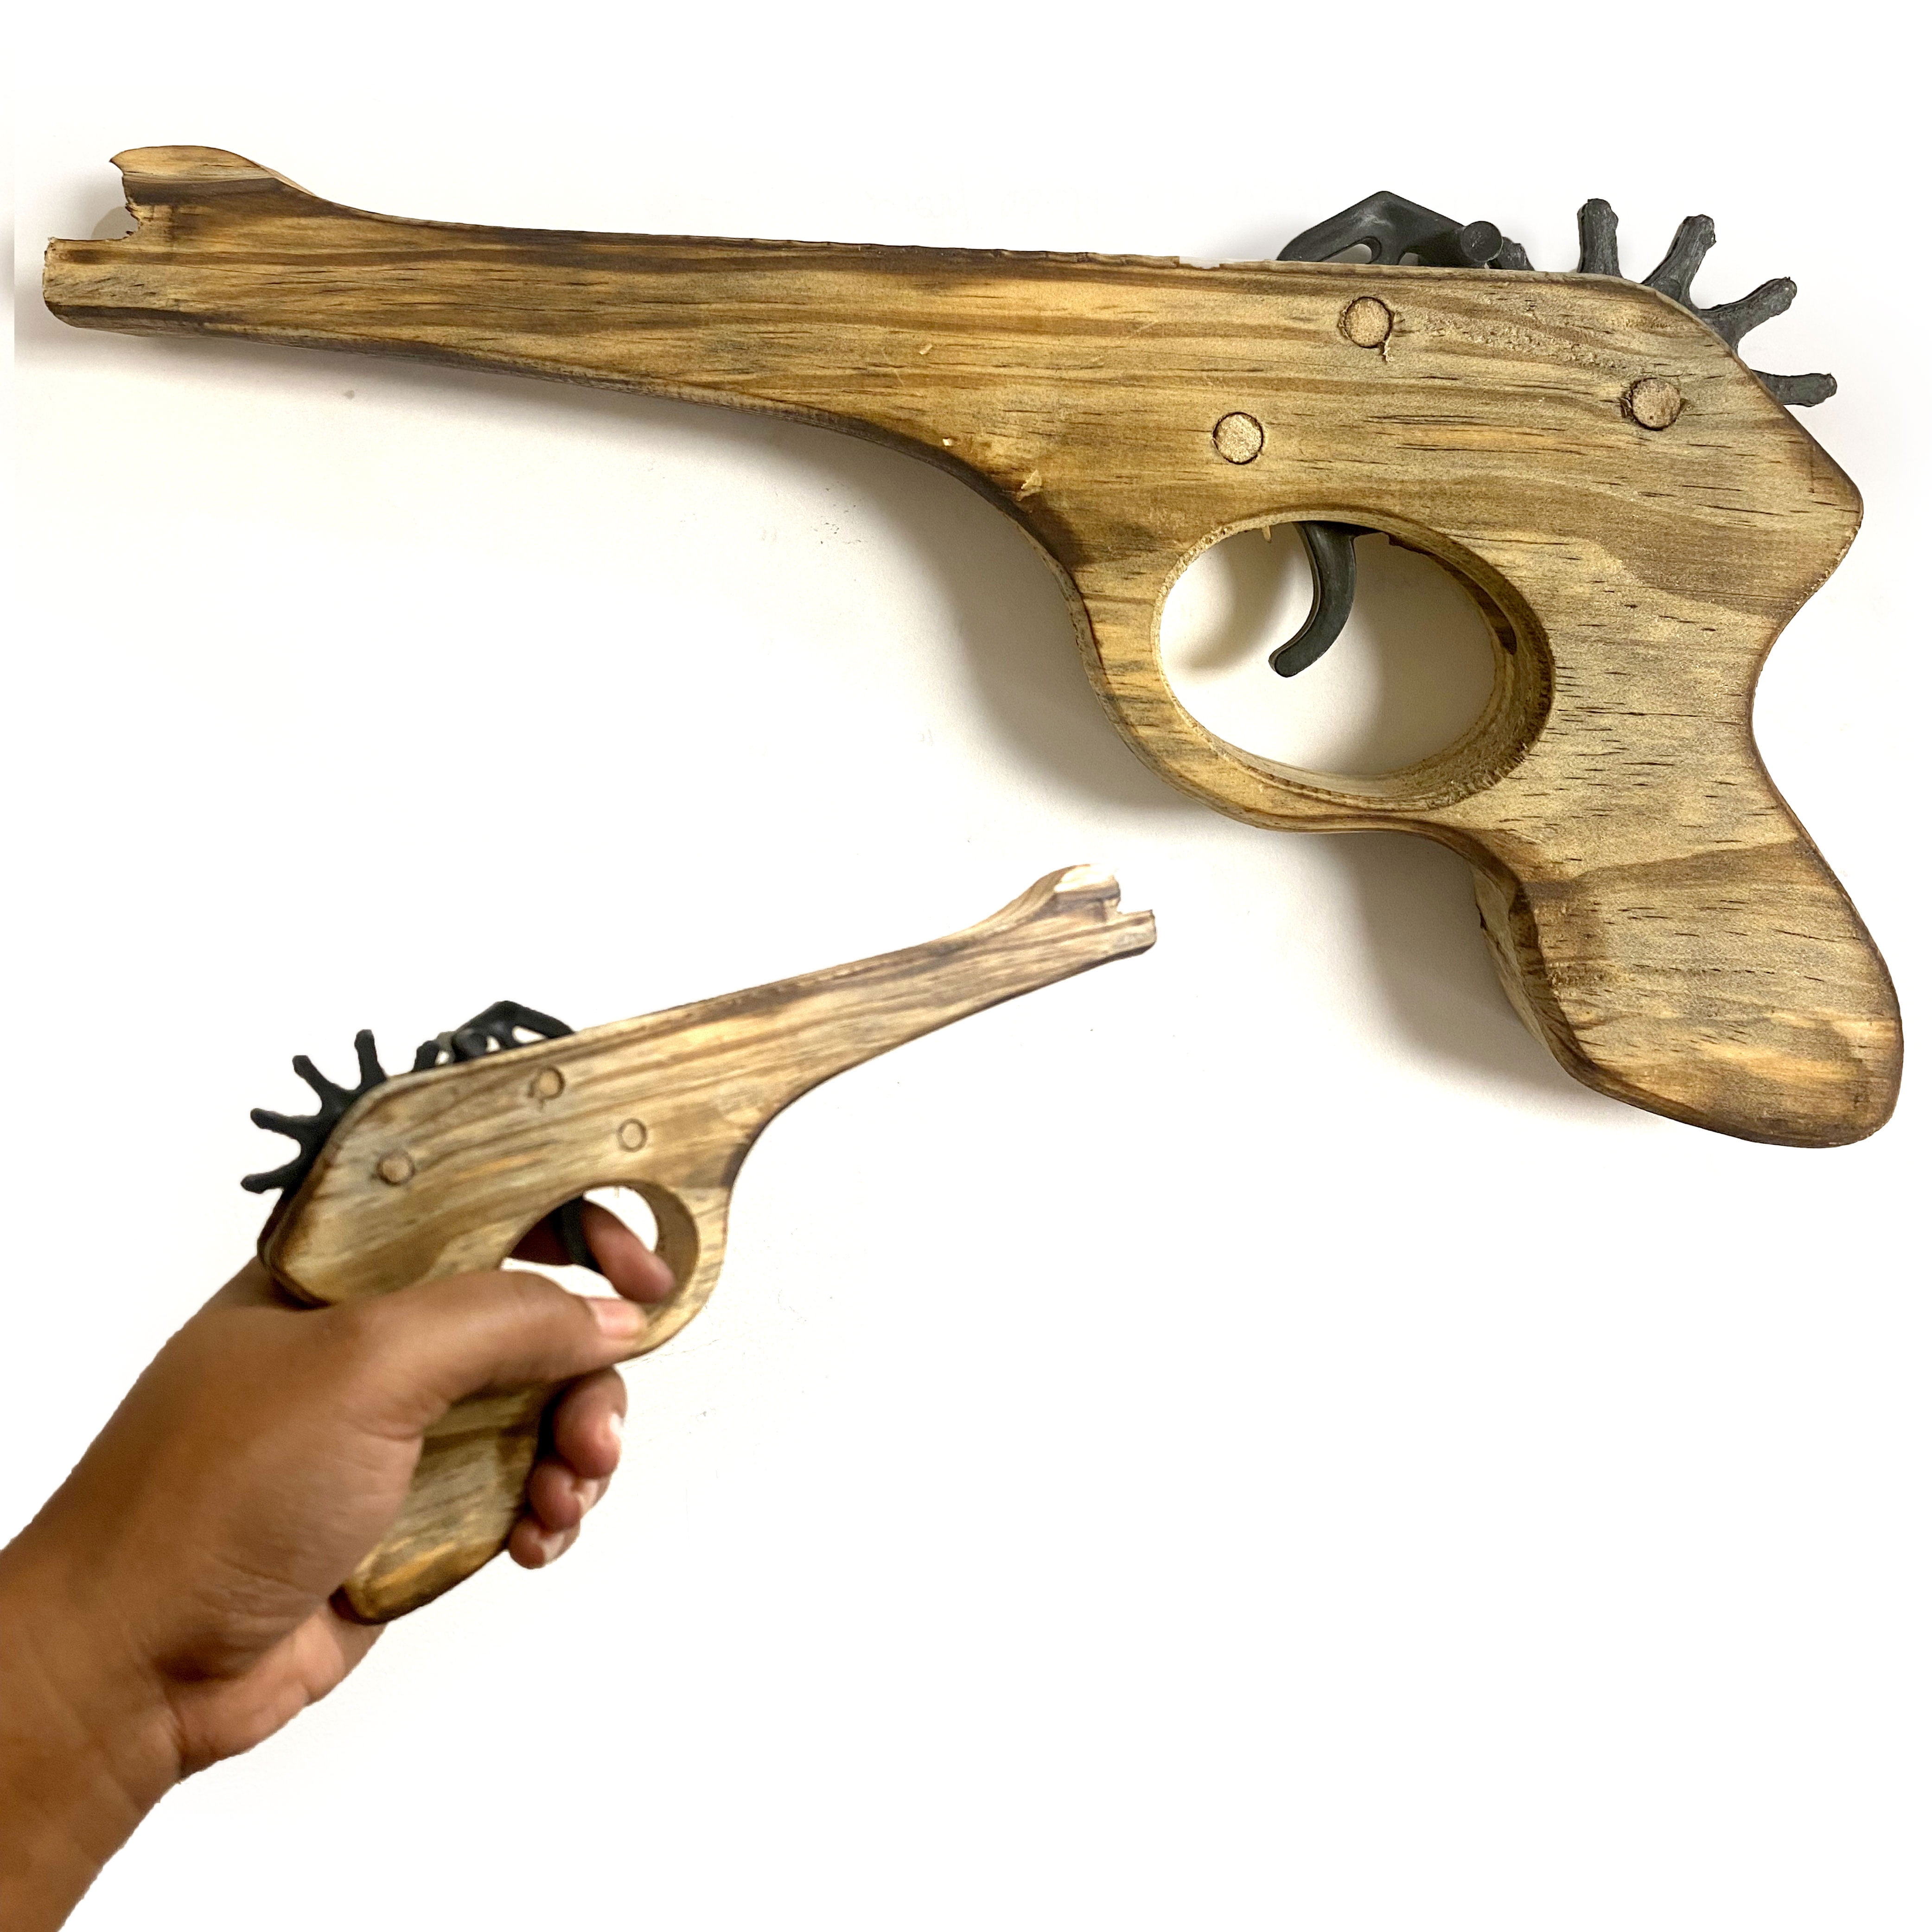 Wooden 3D Puzzle Gun Revolver Rubber Band Educational Model Toy For Kid Boy Gift 